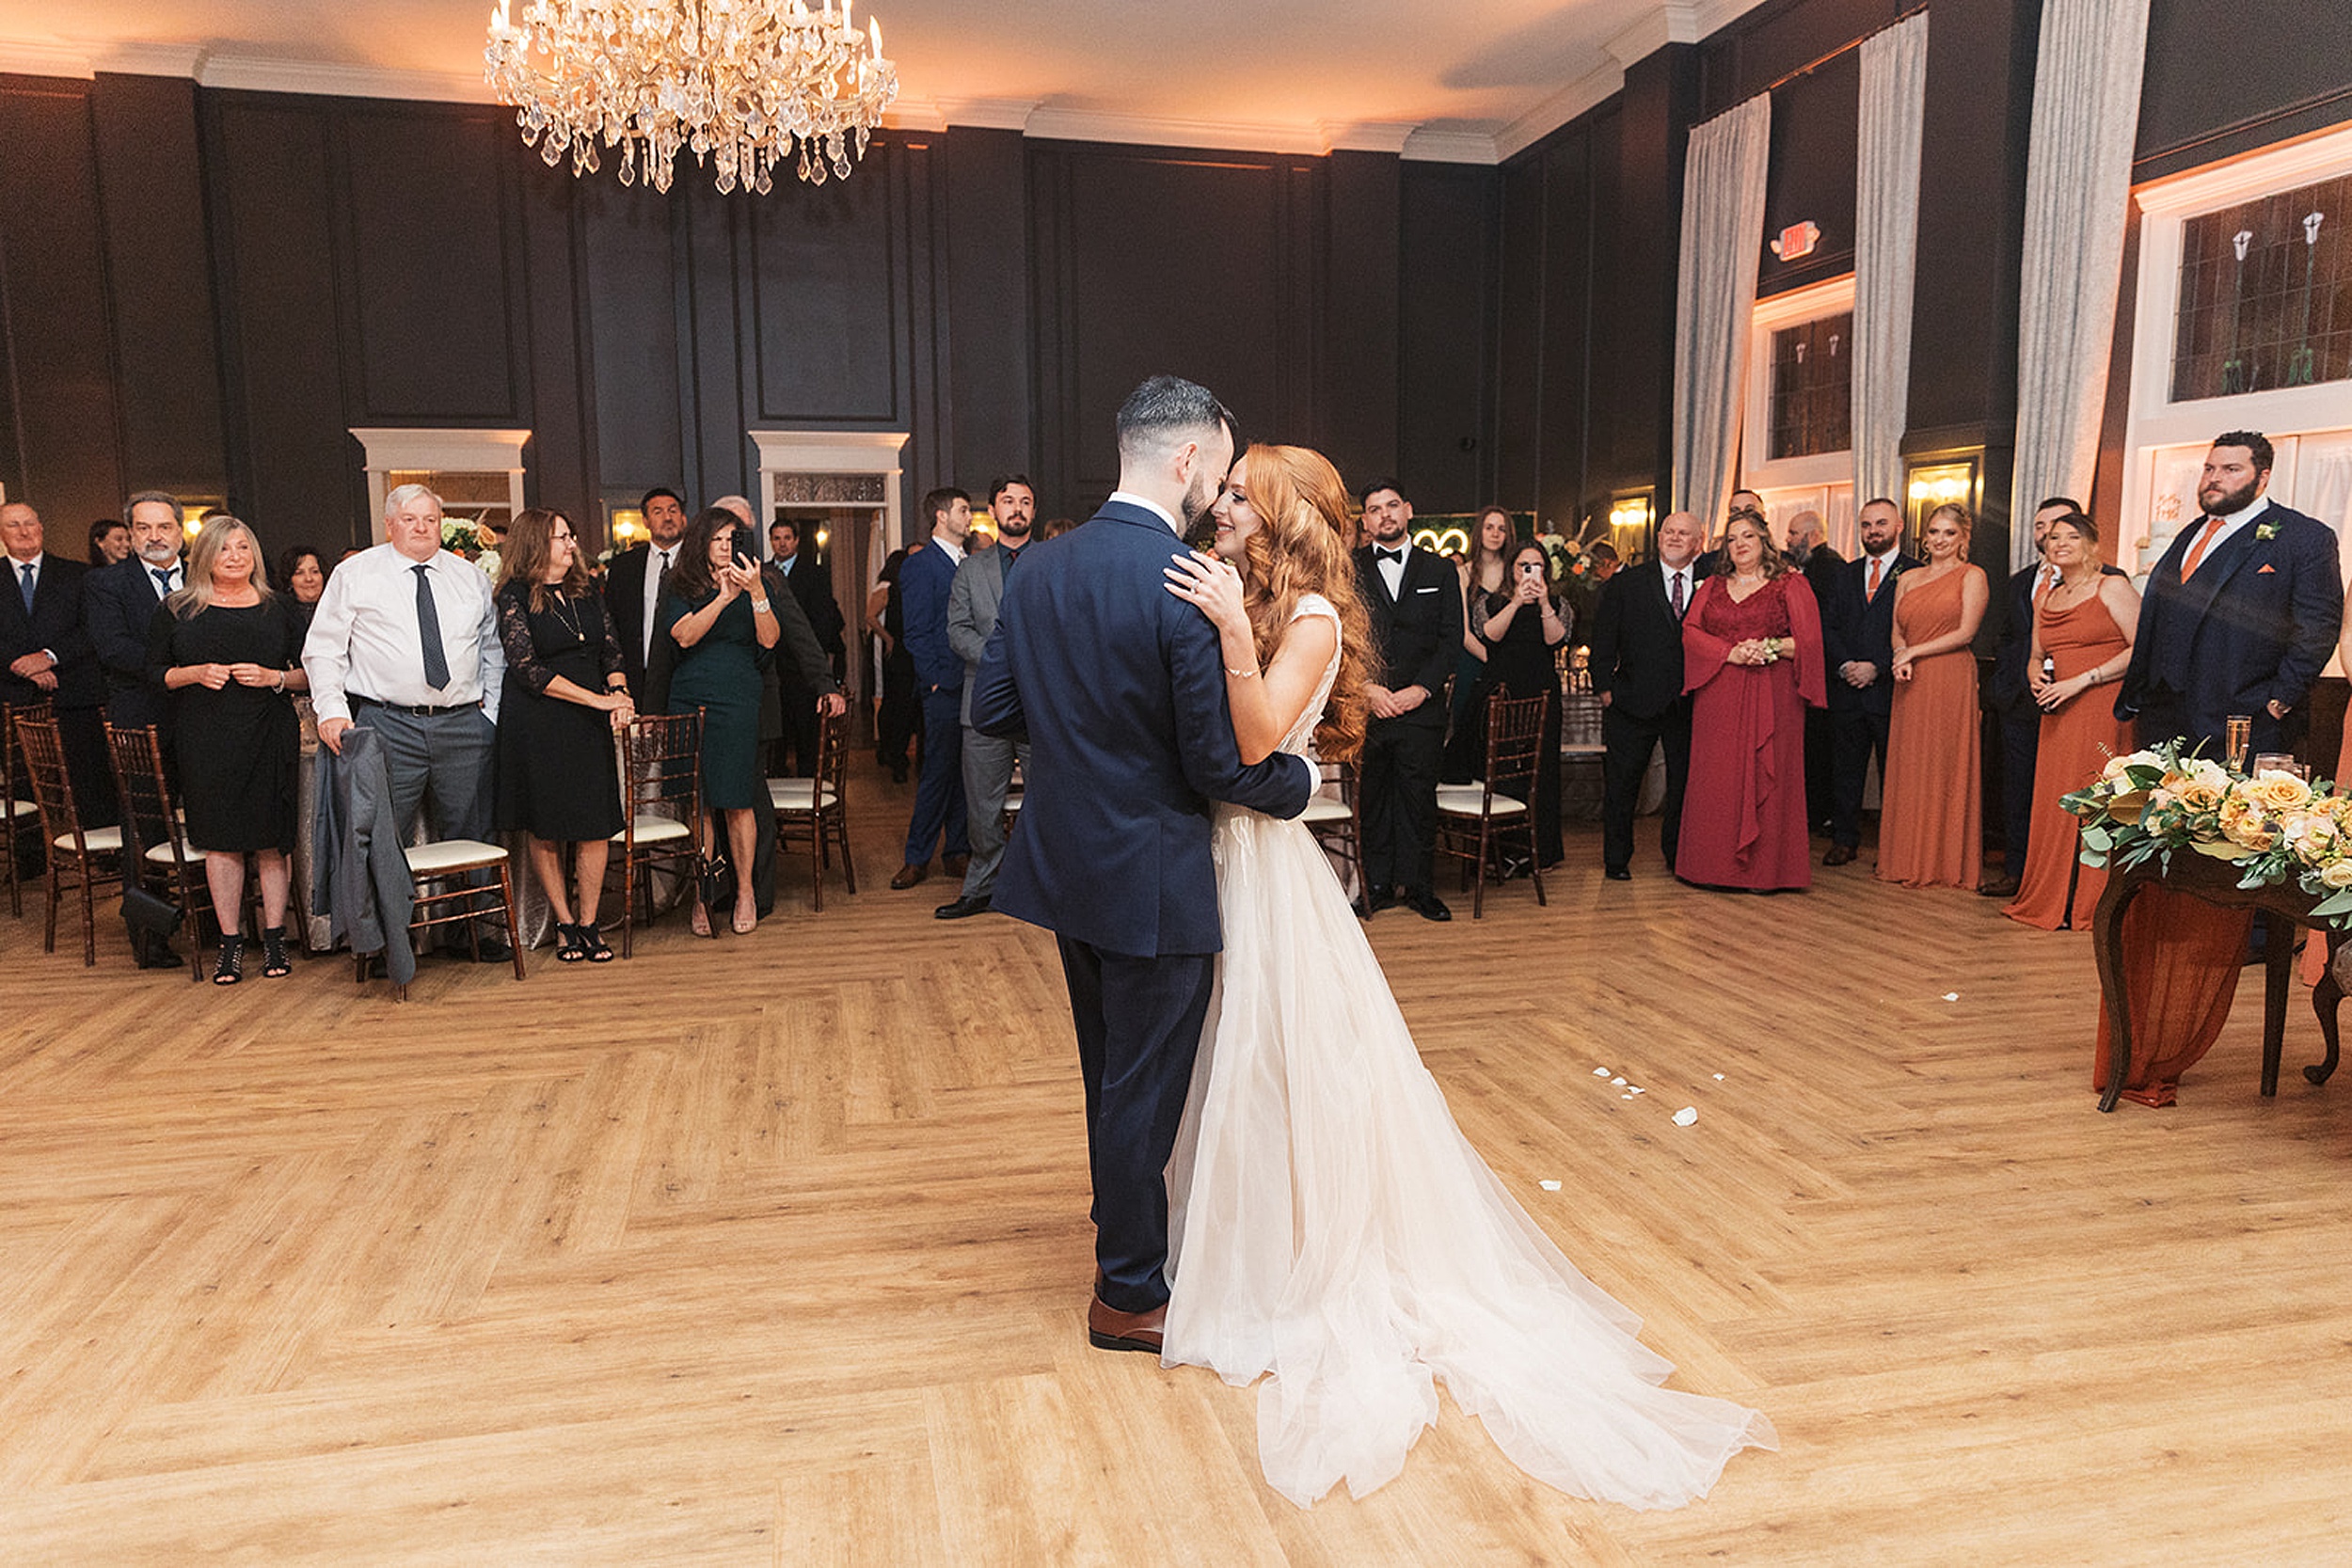 Newlyweds dance close while their guests look on